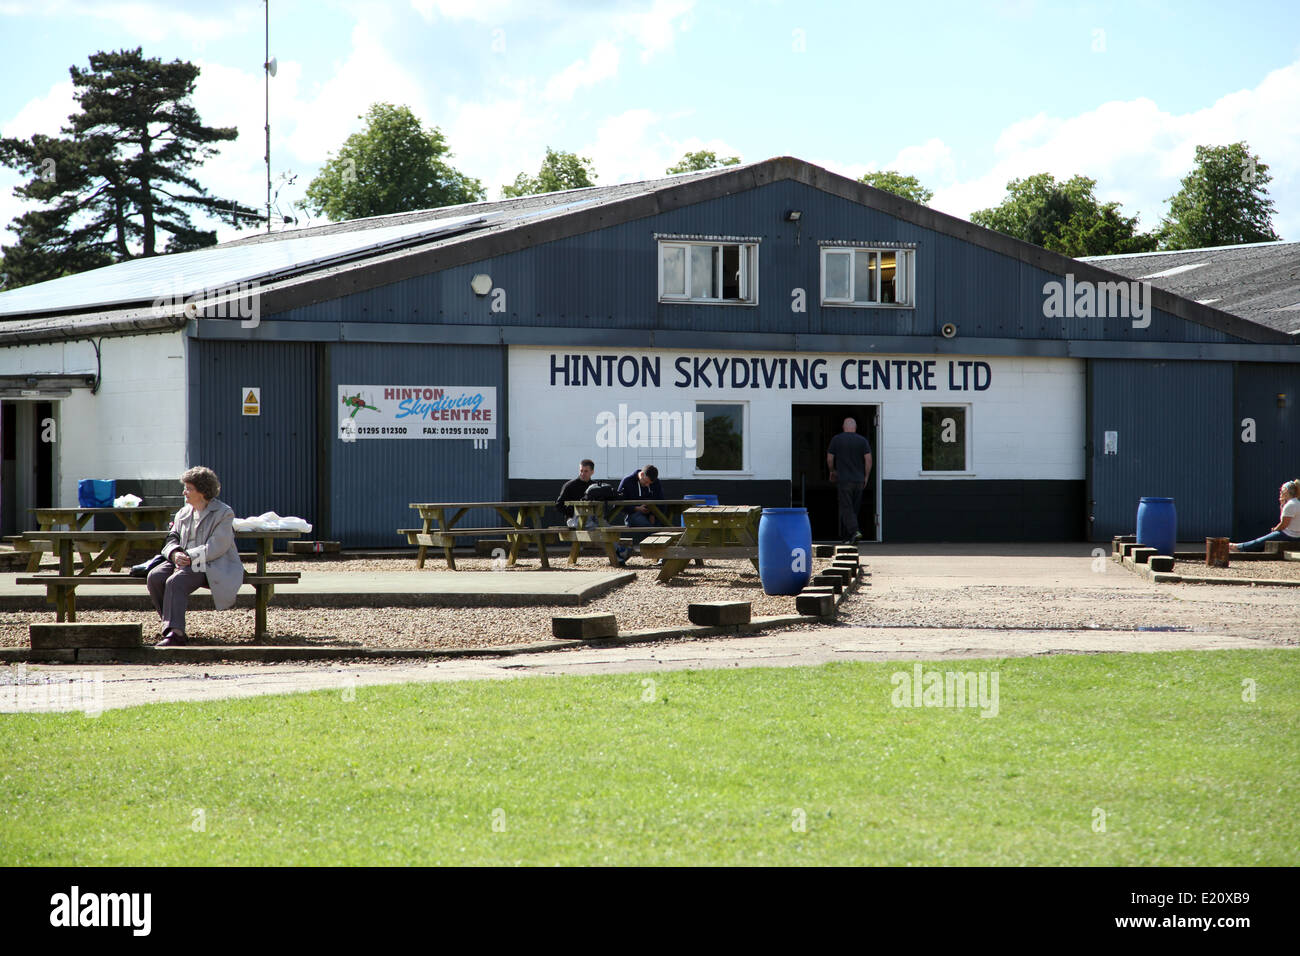 Hinton Skydiving Centre Limited a Hinton in siepi Airfield in Oxfordshire Foto Stock